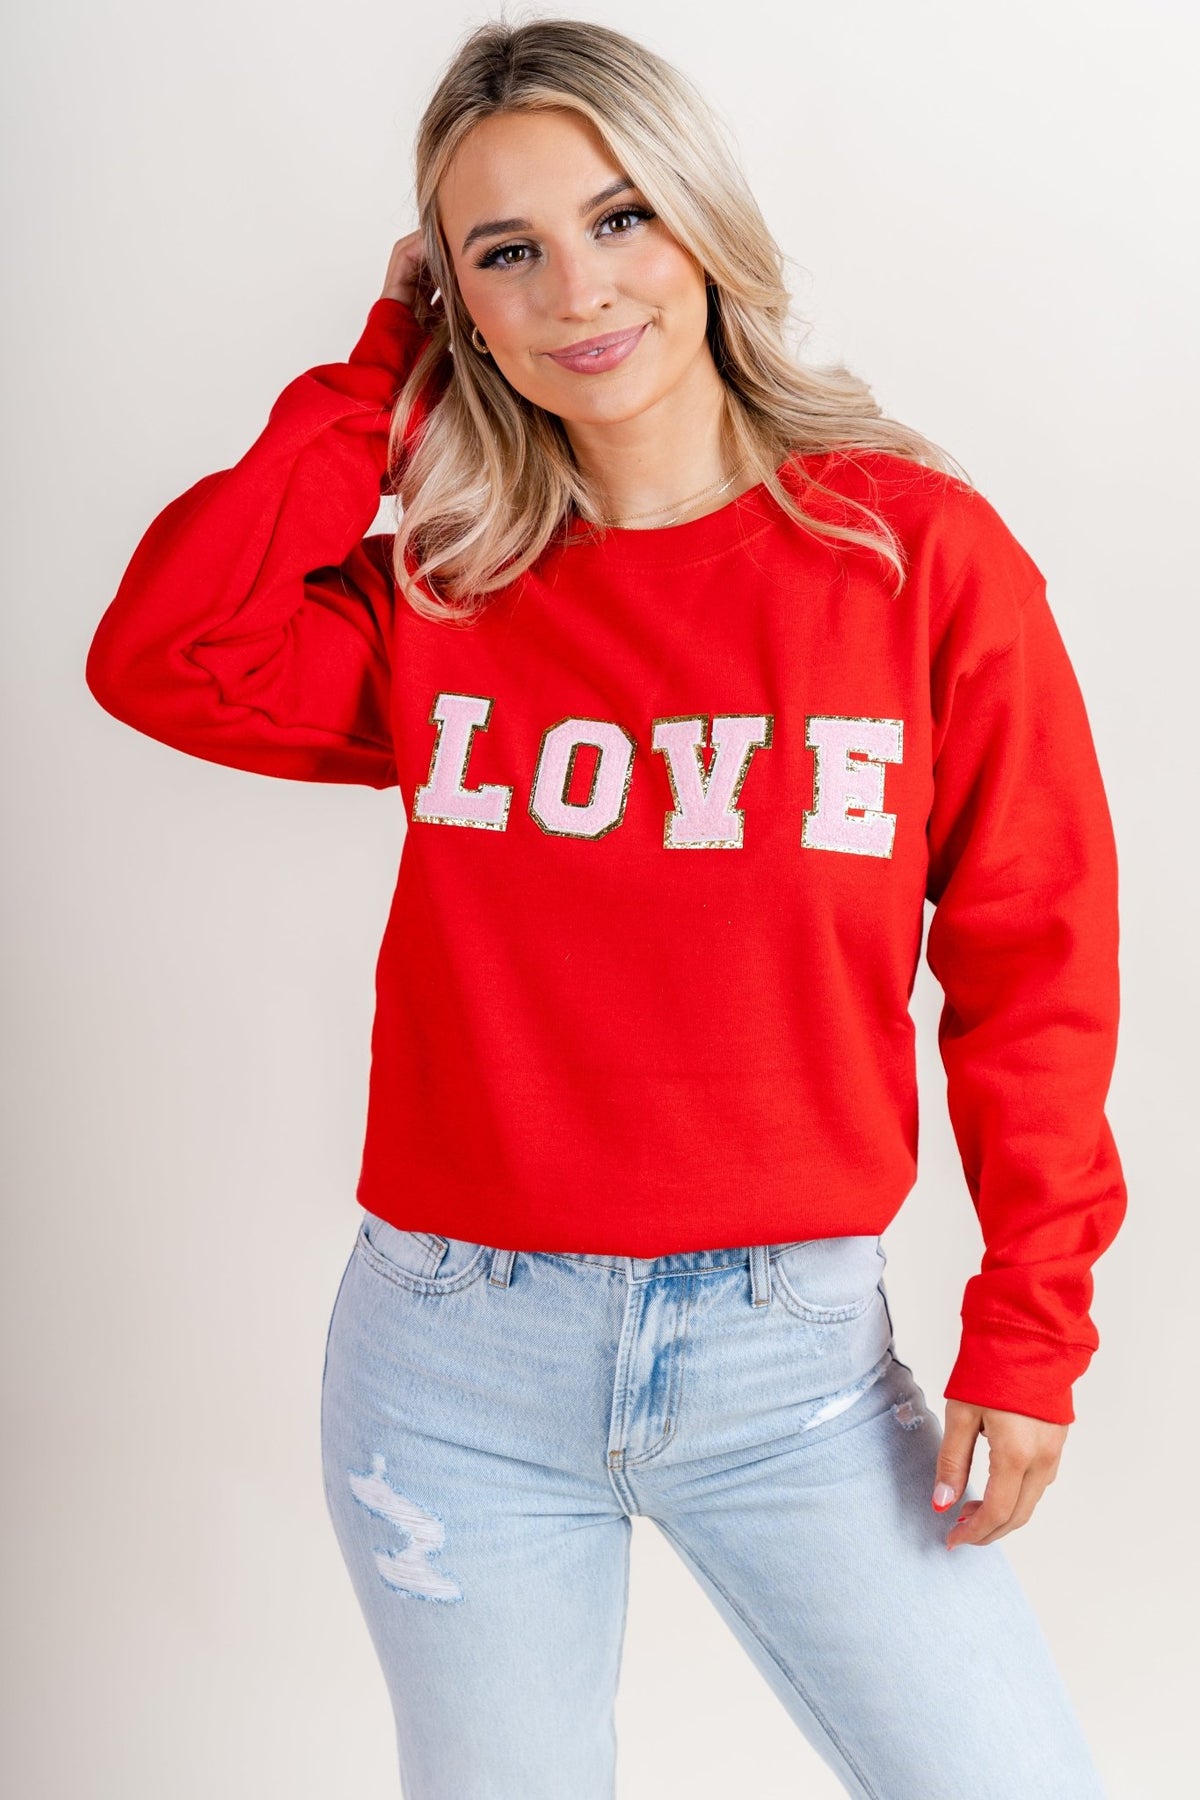 Love patch sweatshirt red - Trendy T-Shirts for Valentine's Day at Lush Fashion Lounge Boutique in Oklahoma City